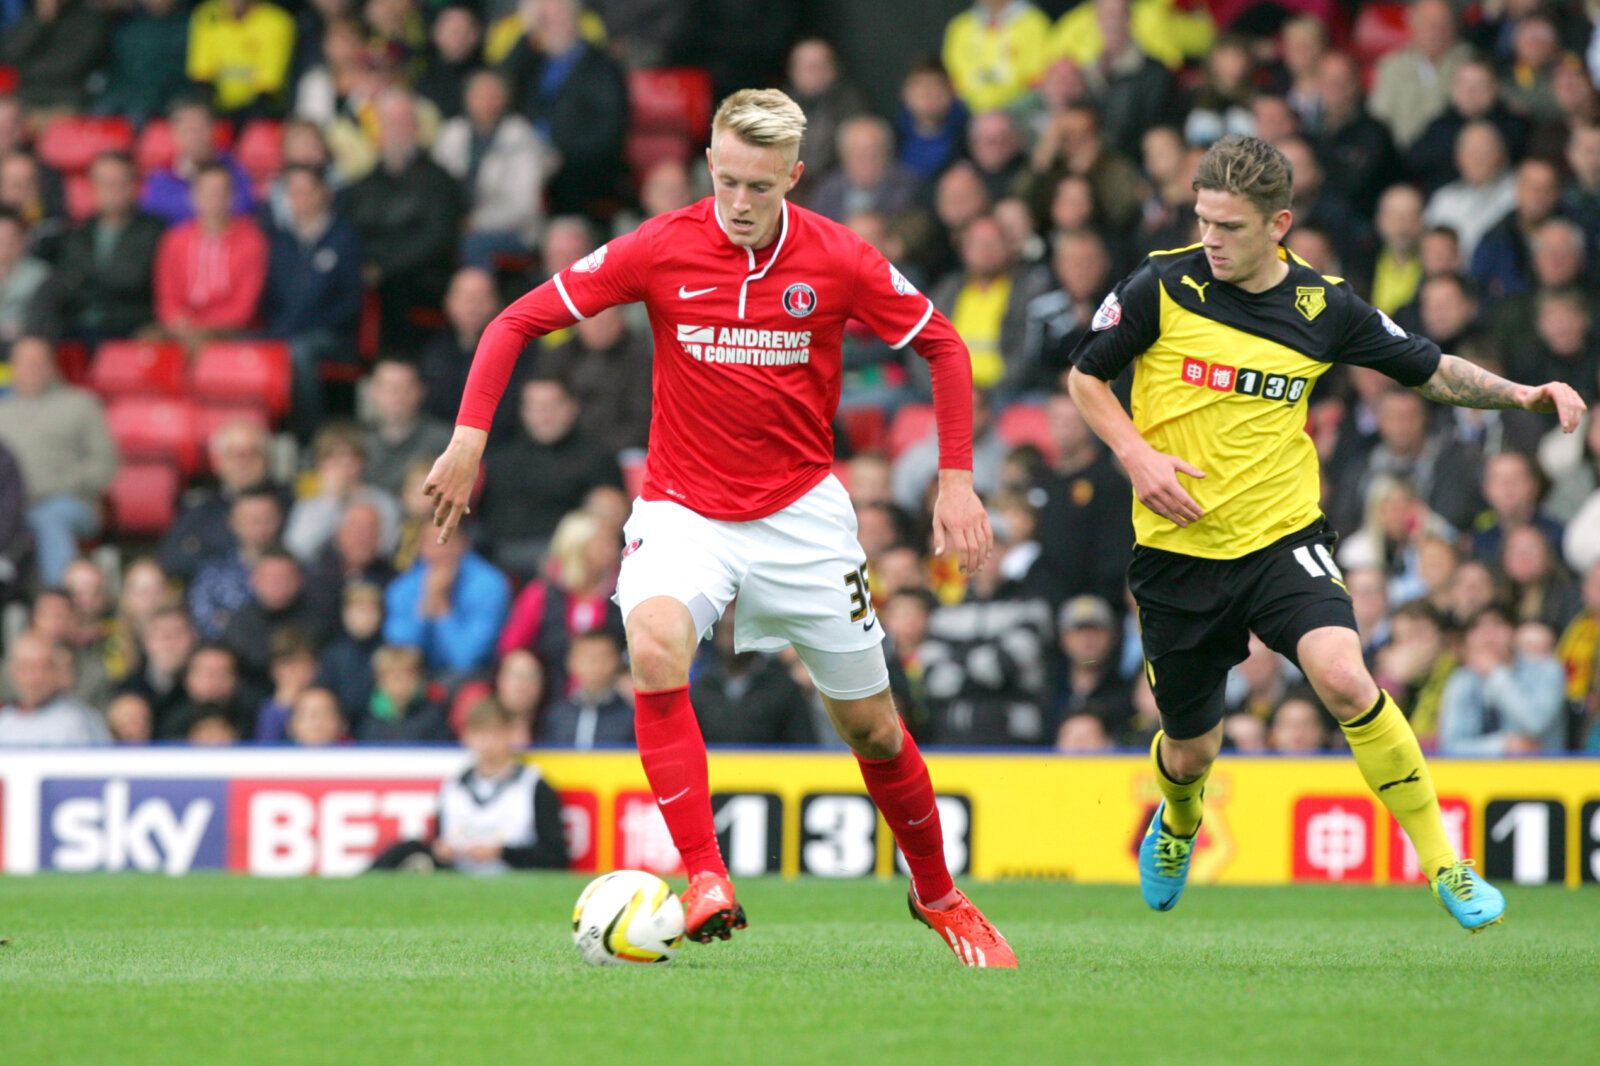 Football - Watford v Charlton Athletic - Sky Bet Football League Championship - Vicarage Road - 13/14 - 14/9/13 
Charlton Athletic's Joe Pigott in action against Watford's Sean Murray  
Mandatory Credit: Action Images / David Field 
EDITORIAL USE ONLY. No use with unauthorized audio, video, data, fixture lists, club/league logos or live services. Online in-match use limited to 45 images, no video emulation. No use in betting, games or single club/league/player publications.  Please contact your 